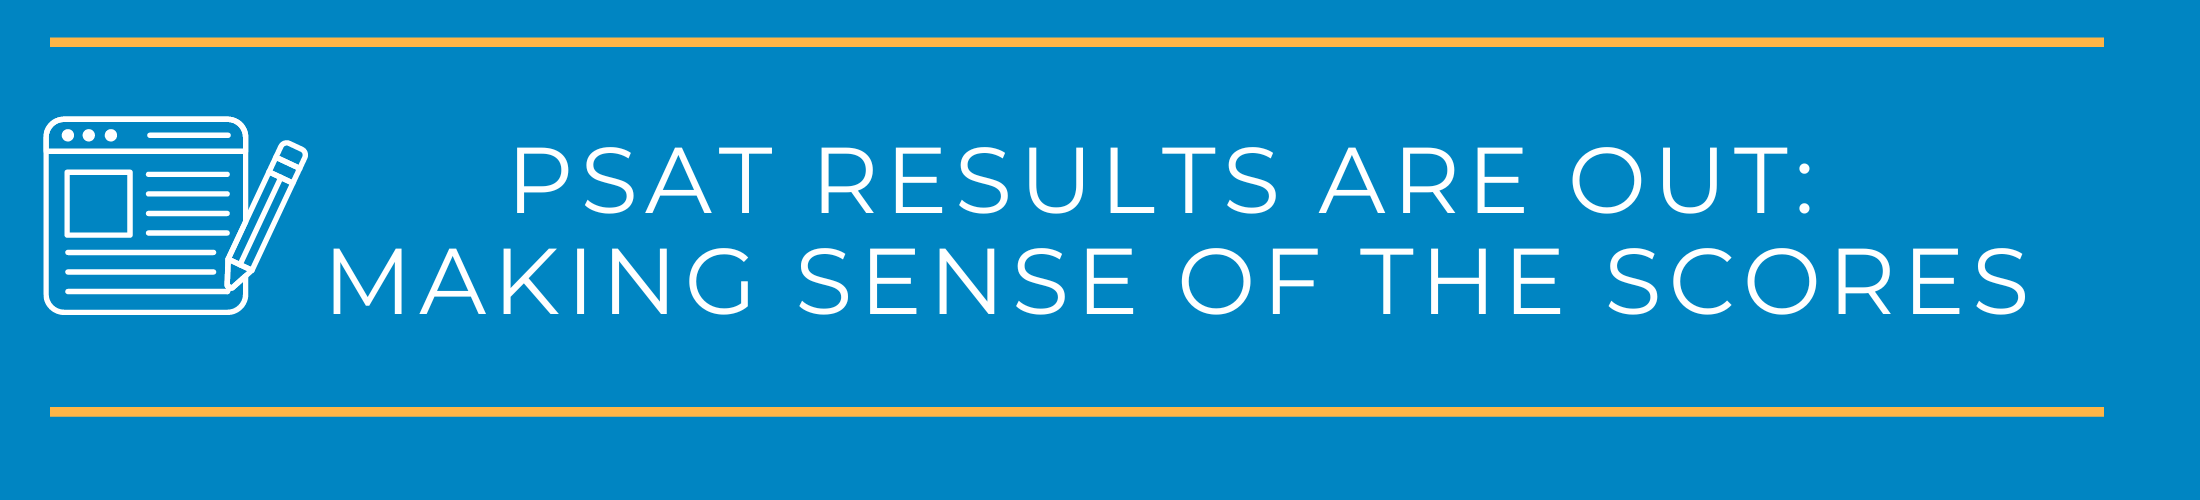 PSAT Results Are Out: Making Sense of the Scores